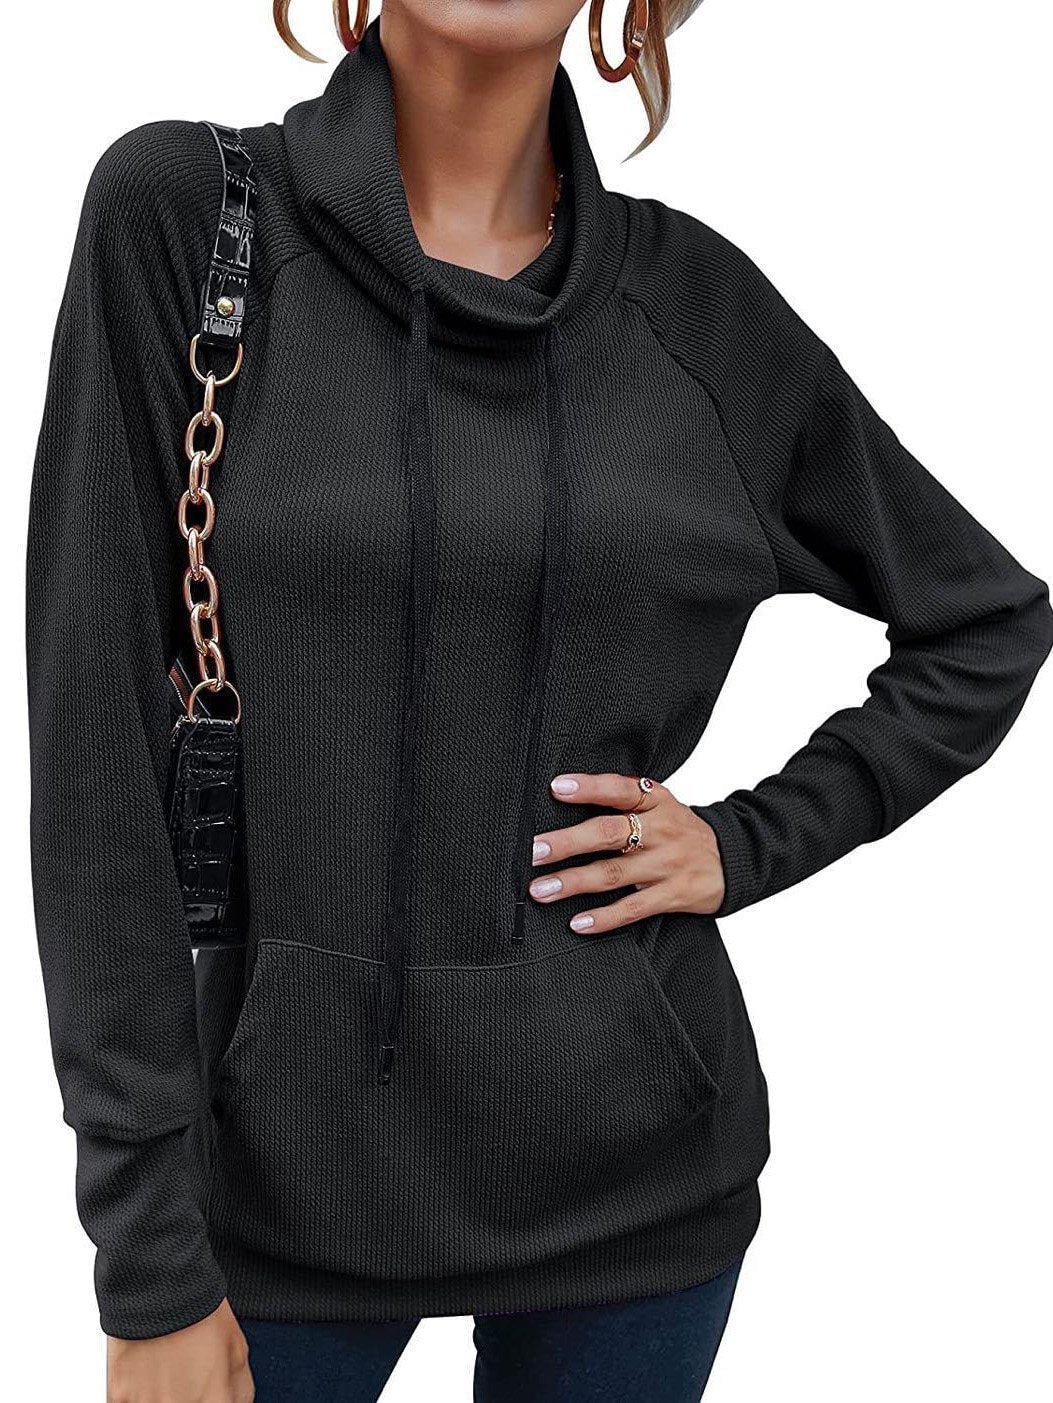 Women's Casual High Neck Long Sleeve Sweater With Drawstring Hood Top